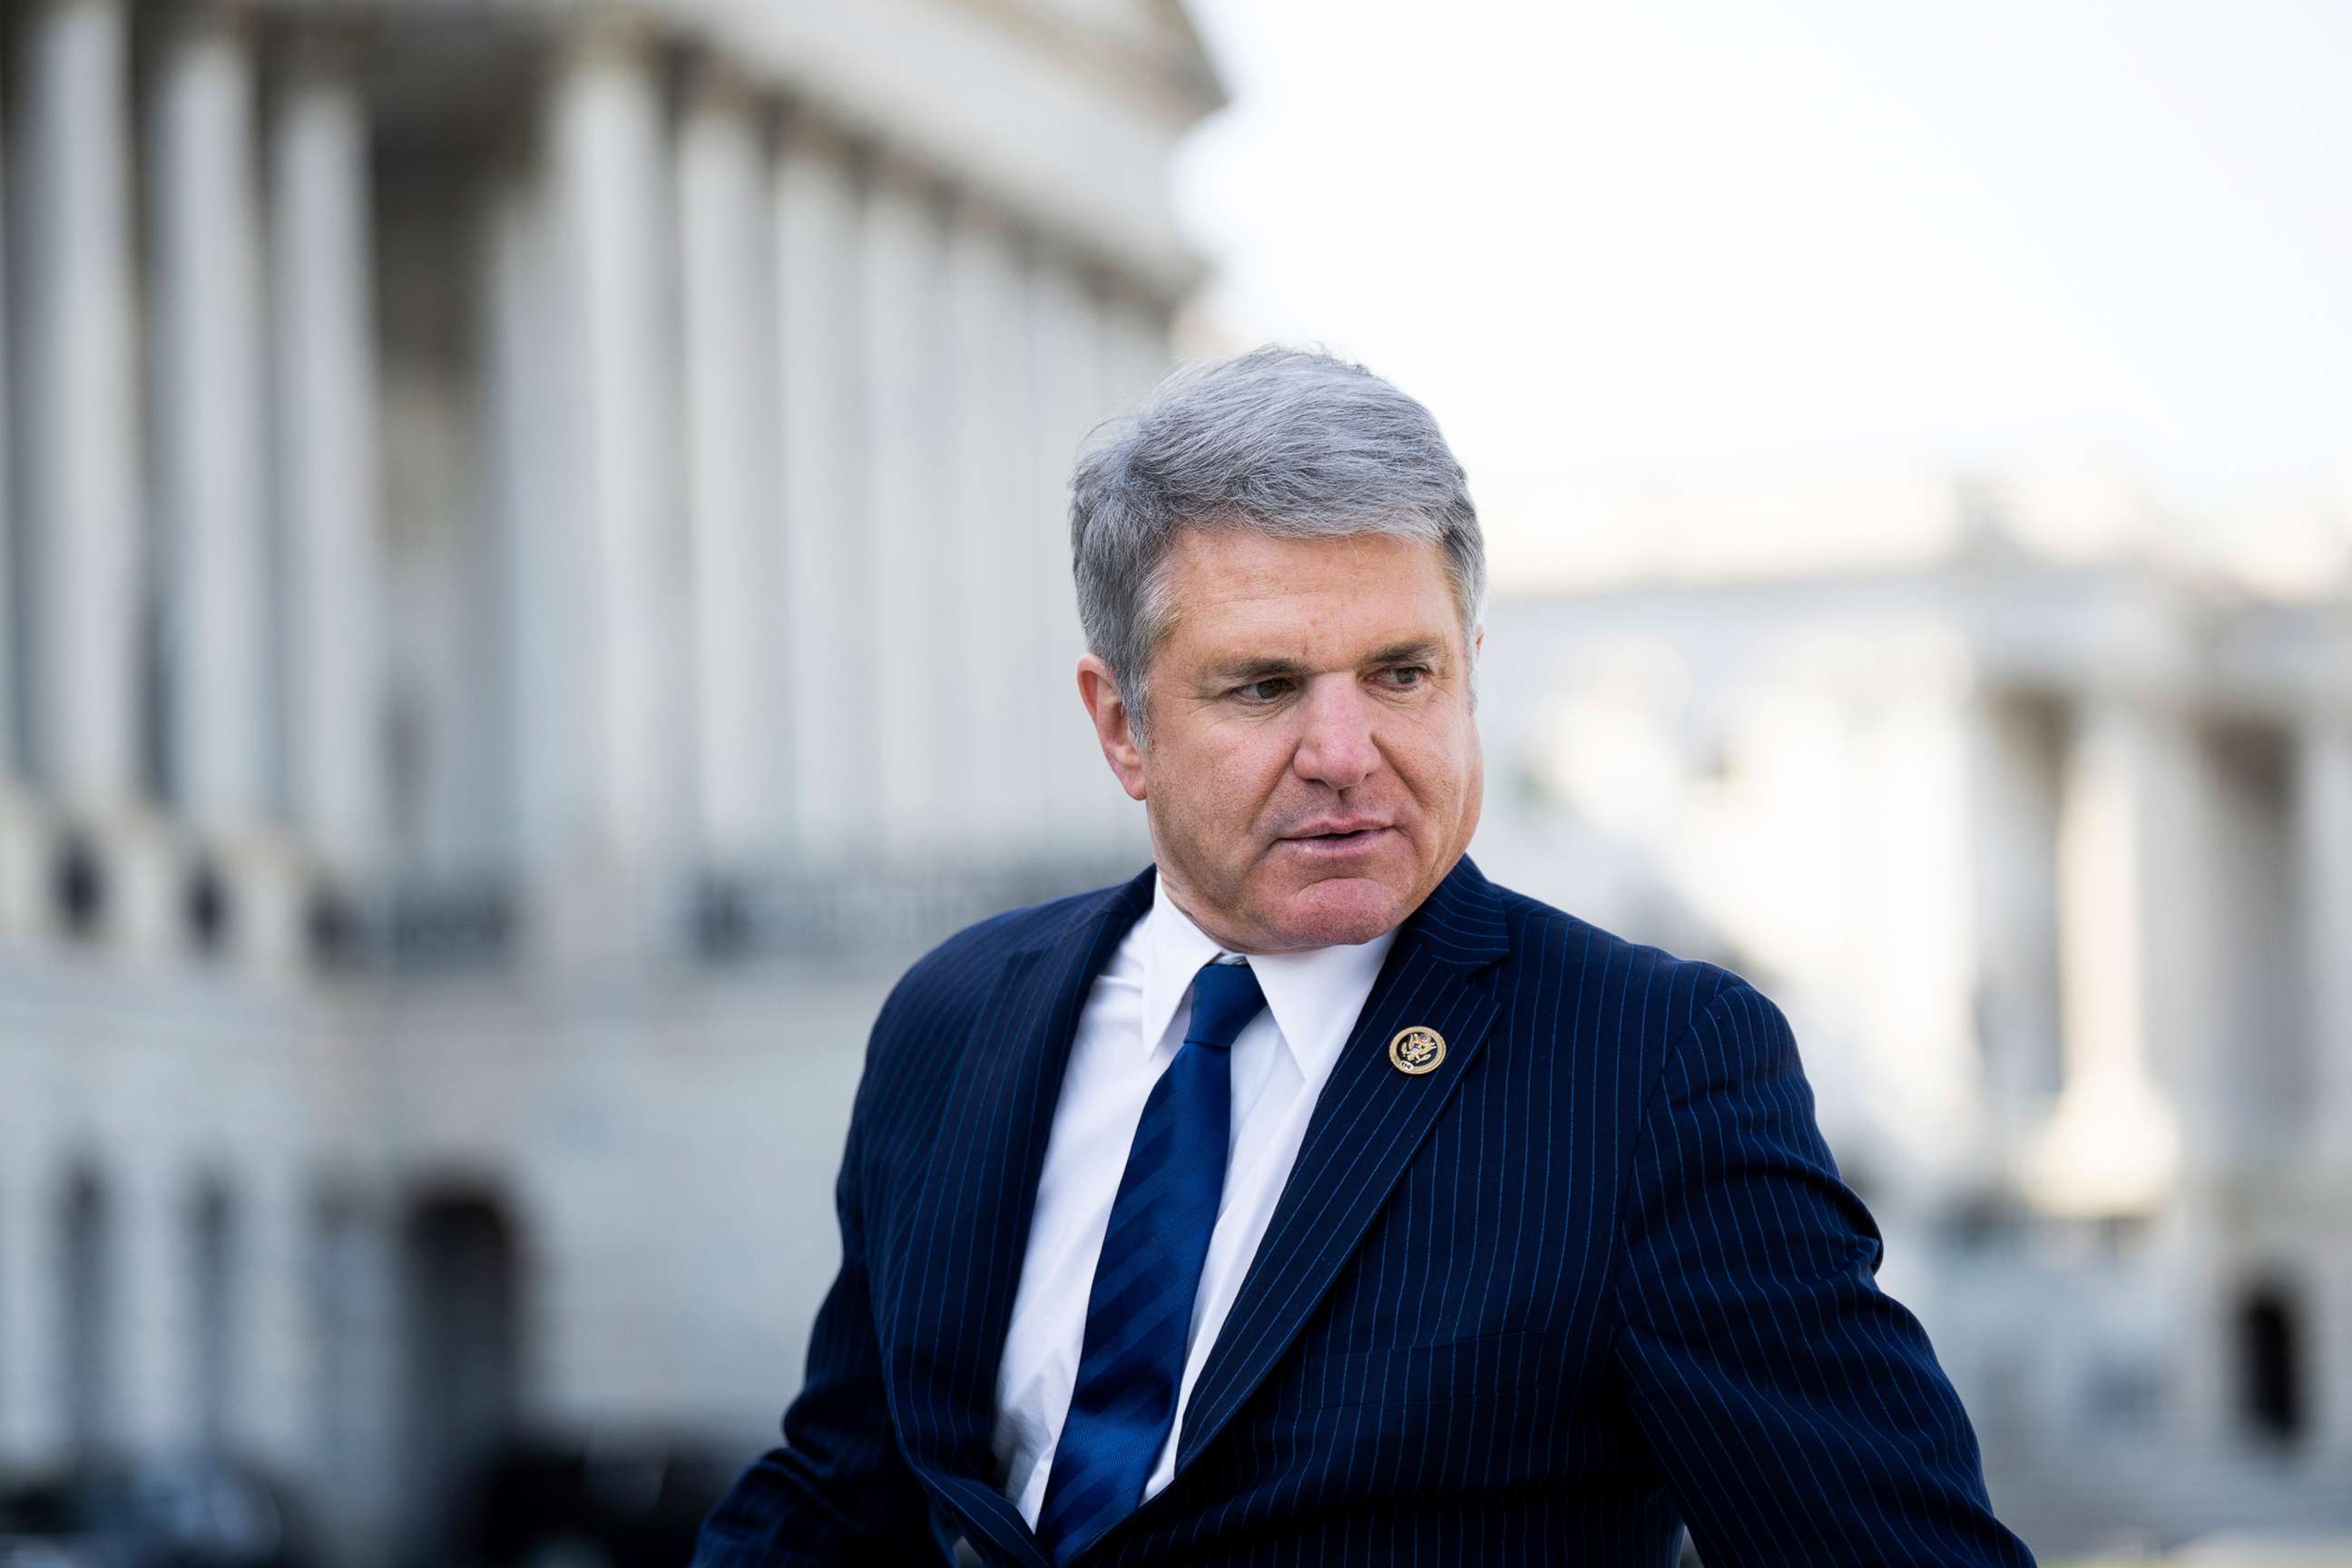 PHOTO: In this April 28, 2022, file photo, Rep. Michael McCaul walks up the House steps of the Capitol in Washington, D.C.